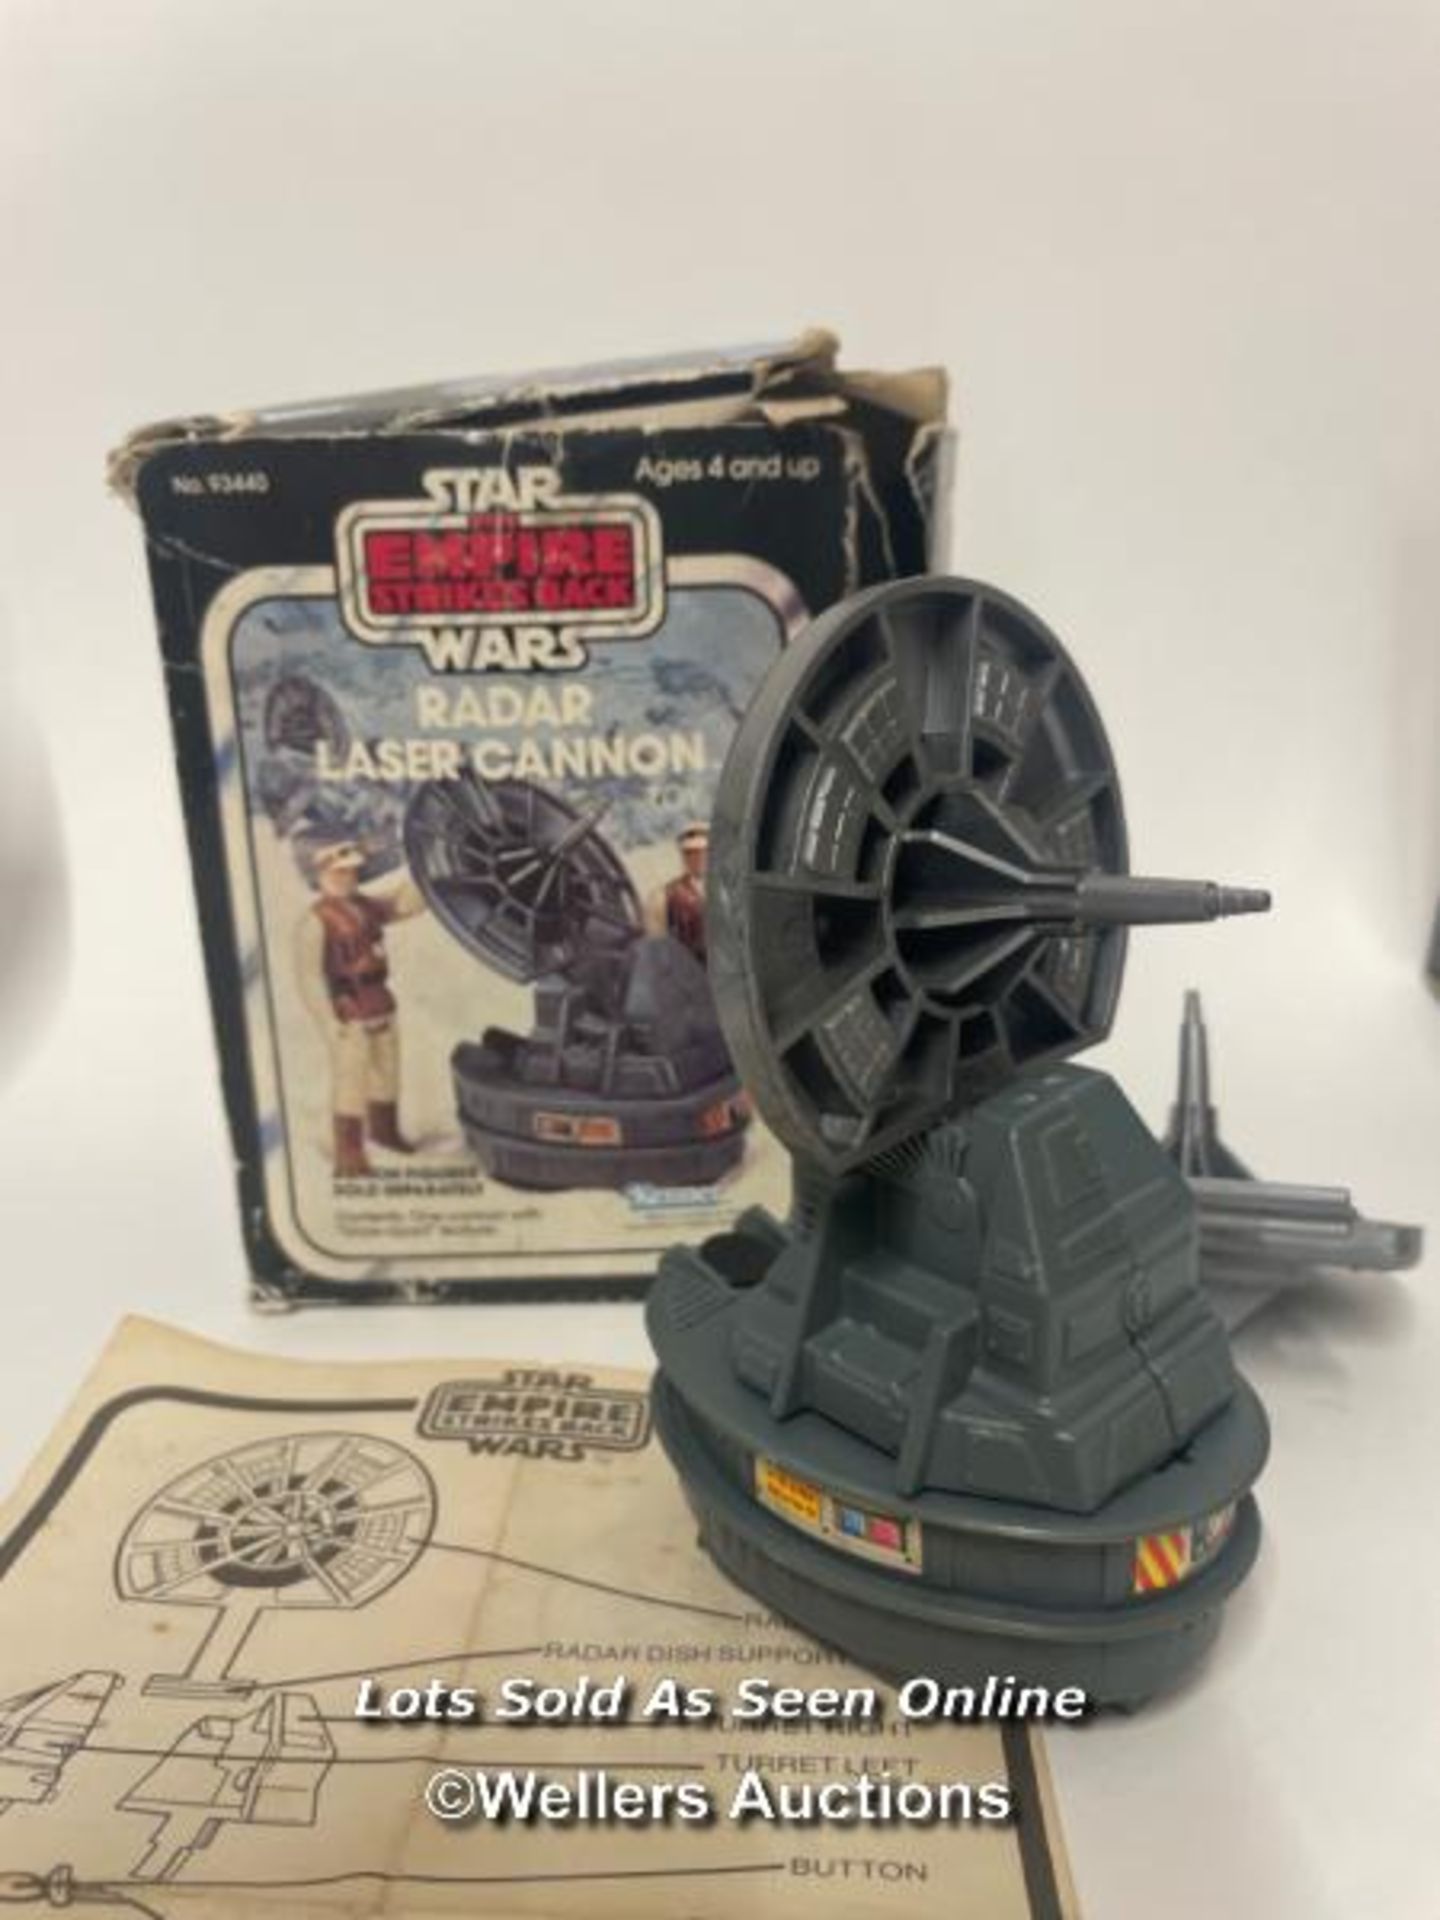 Vintage Star Wars the Battle of Hoth lot, including Palitoy Wampa creature, Kenner Radar Laser - Image 5 of 14